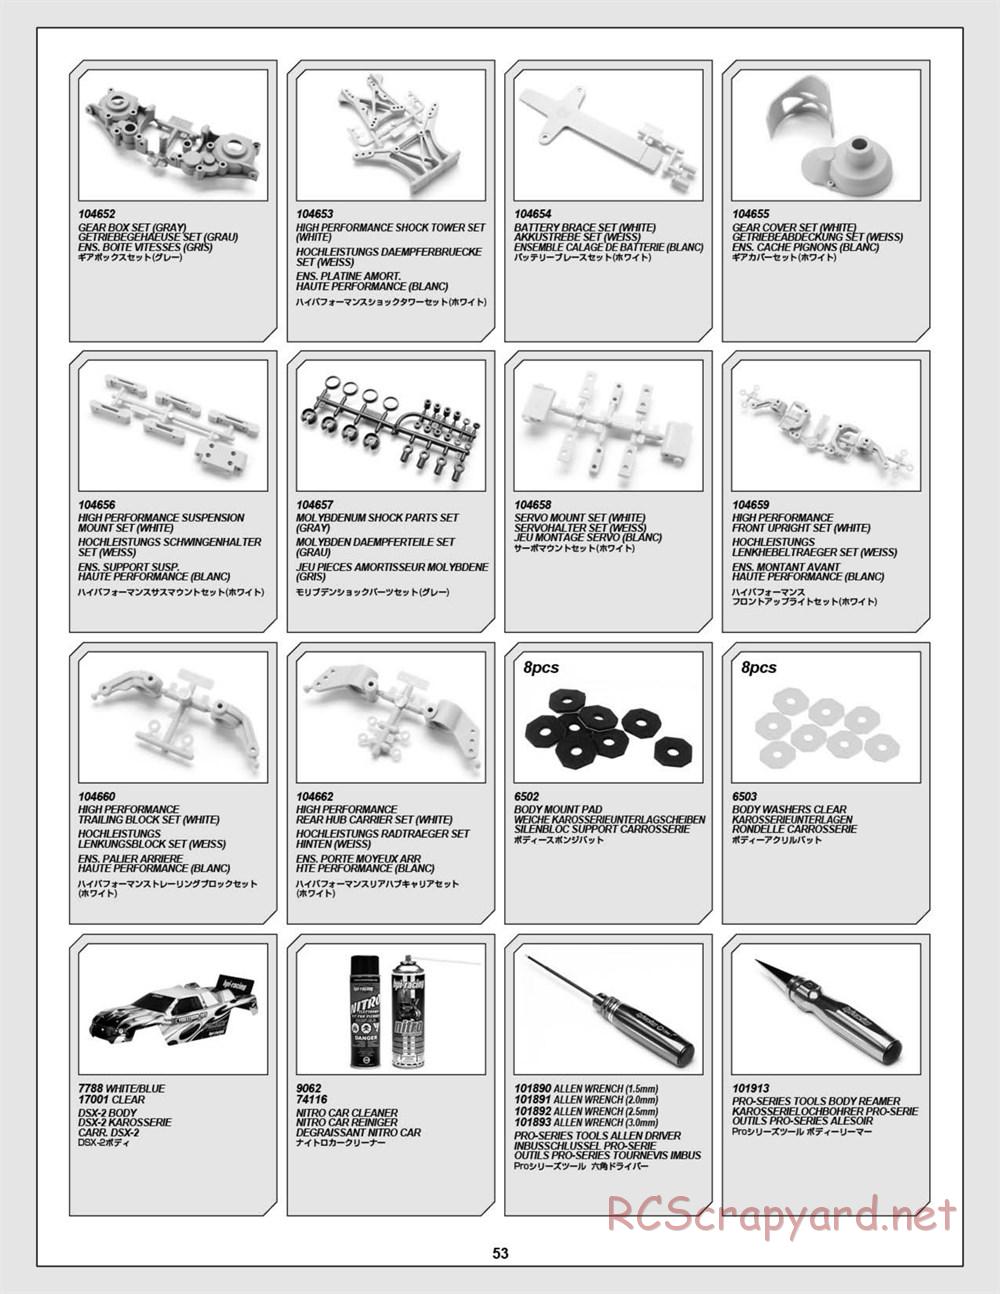 HPI - E-Firestorm 10T Flux - Exploded View - Page 53